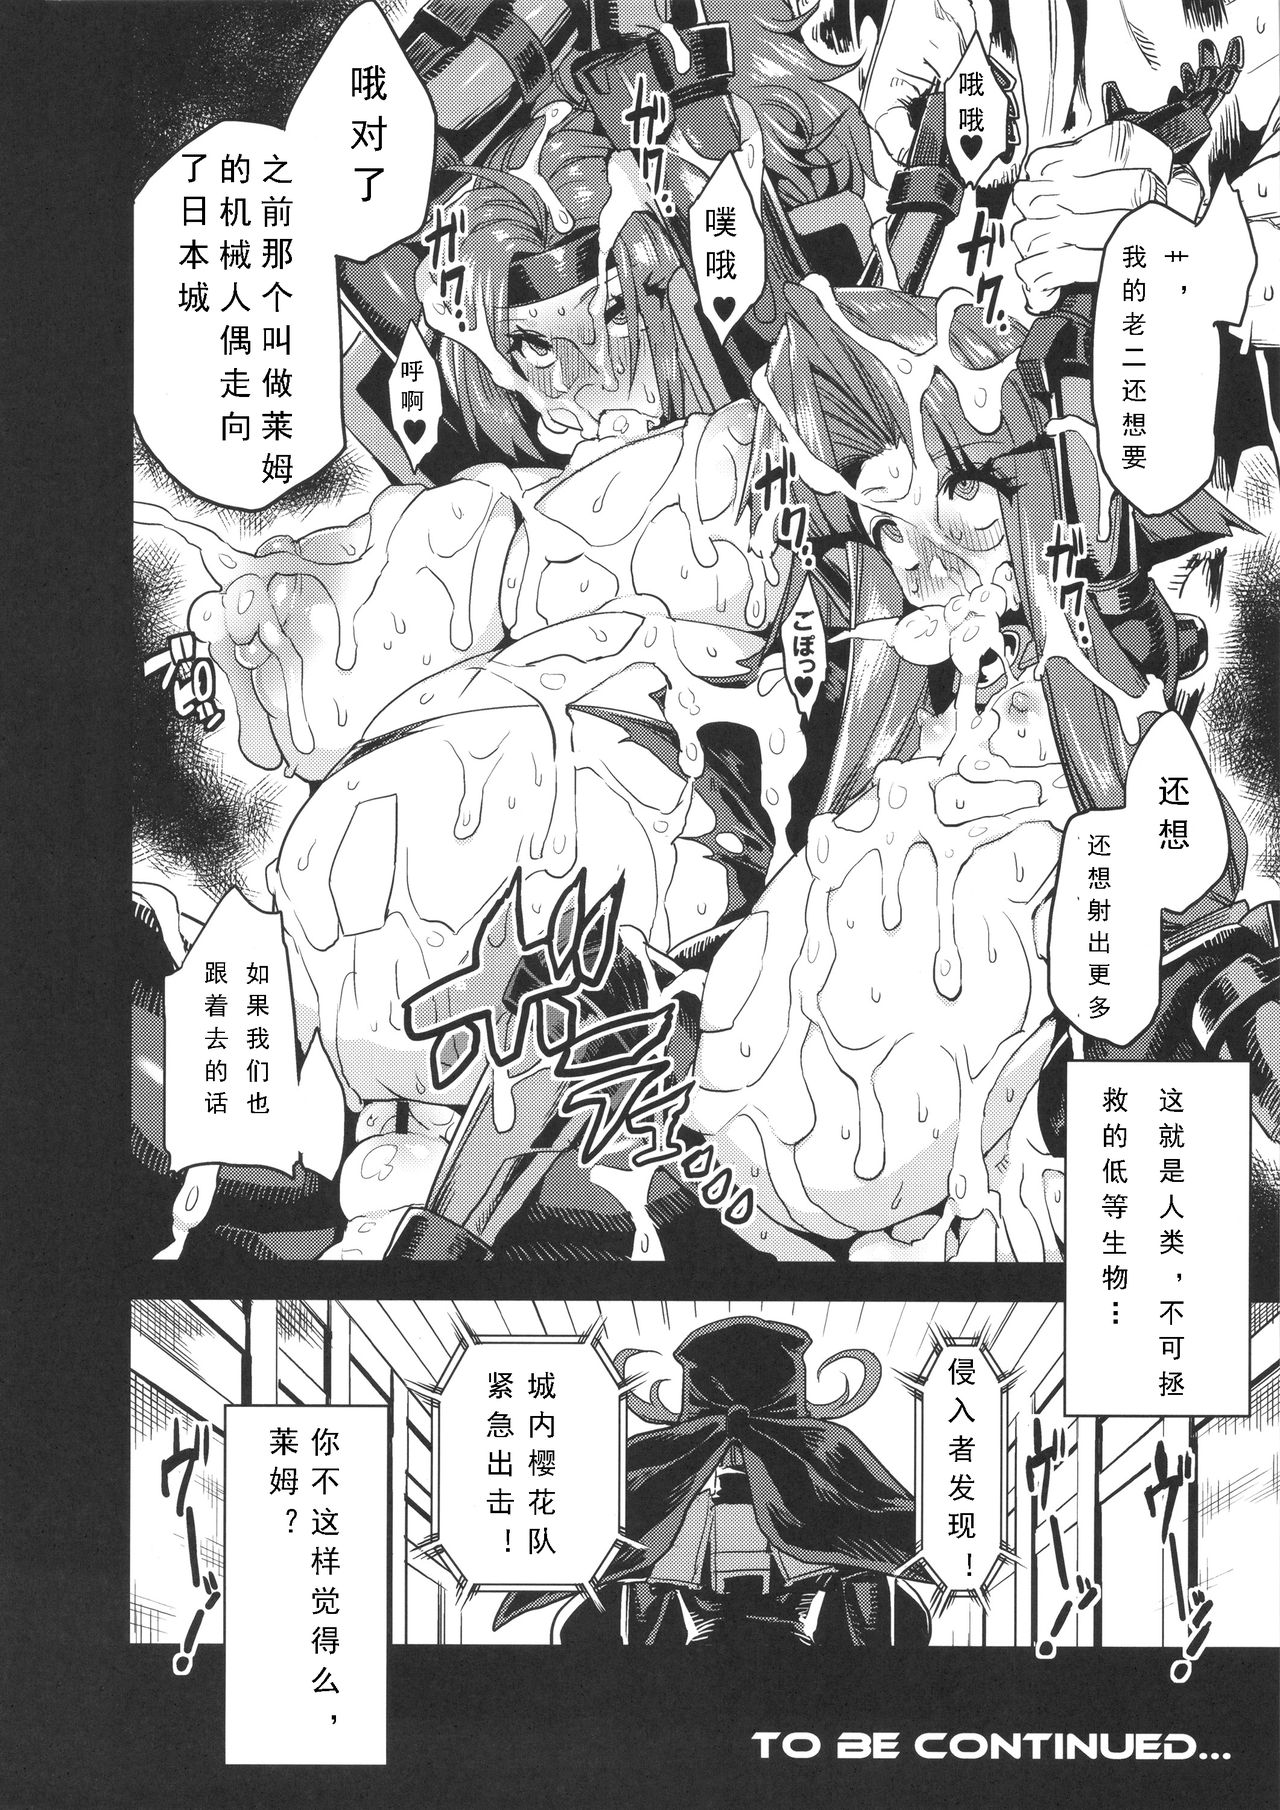 (C89) [OVing (Obui)] Hentai Marionette 4 (Saber Marionette J) [Chinese] [可乐个人汉化] page 24 full